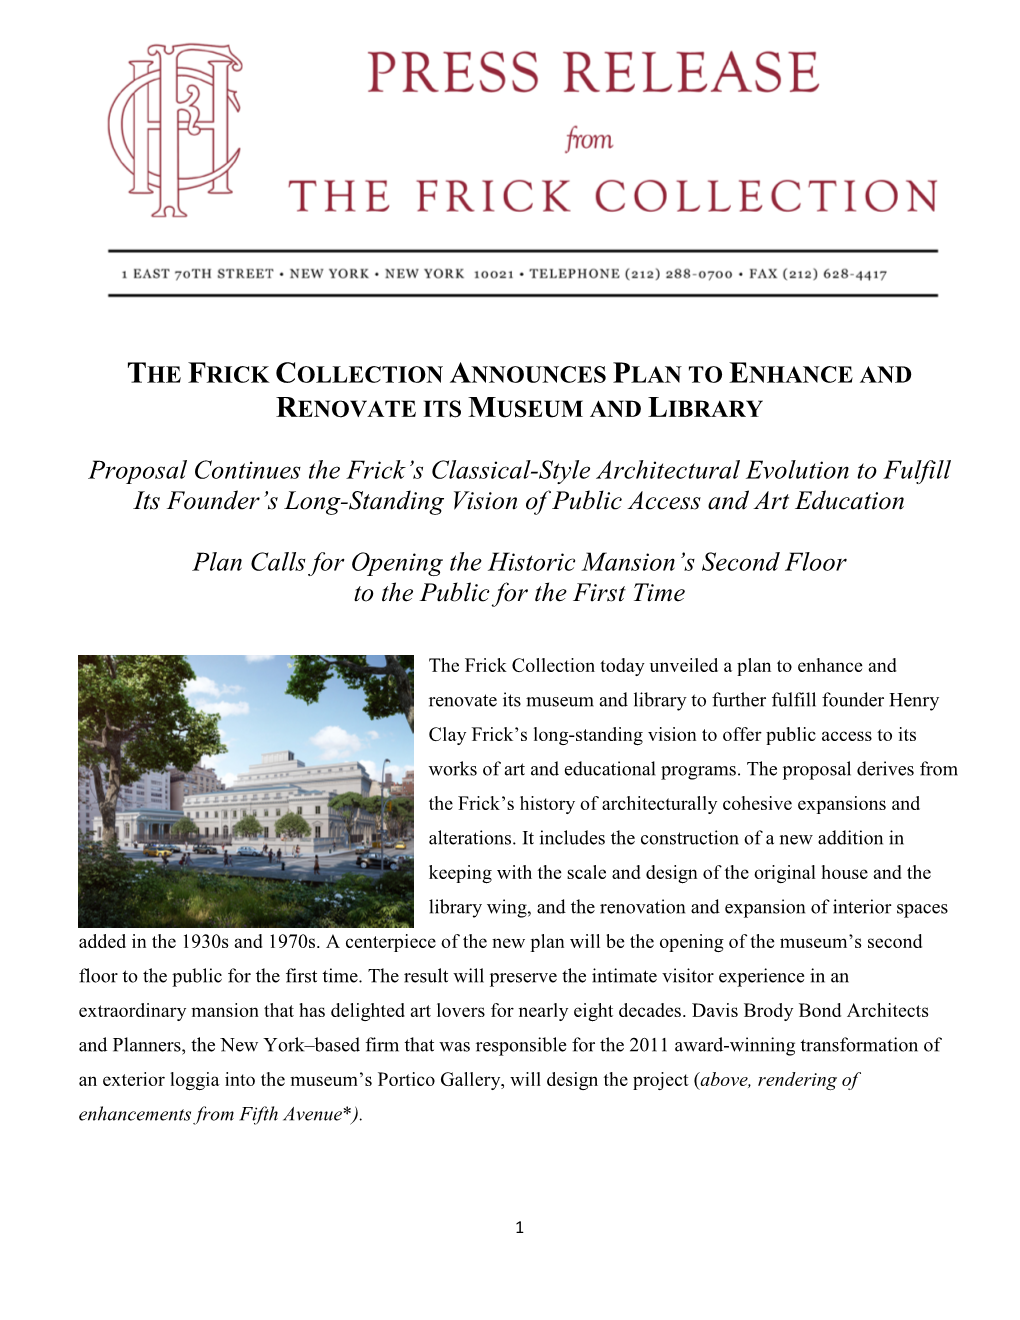 Proposal Continues the Frick's Classical-Style Architectural